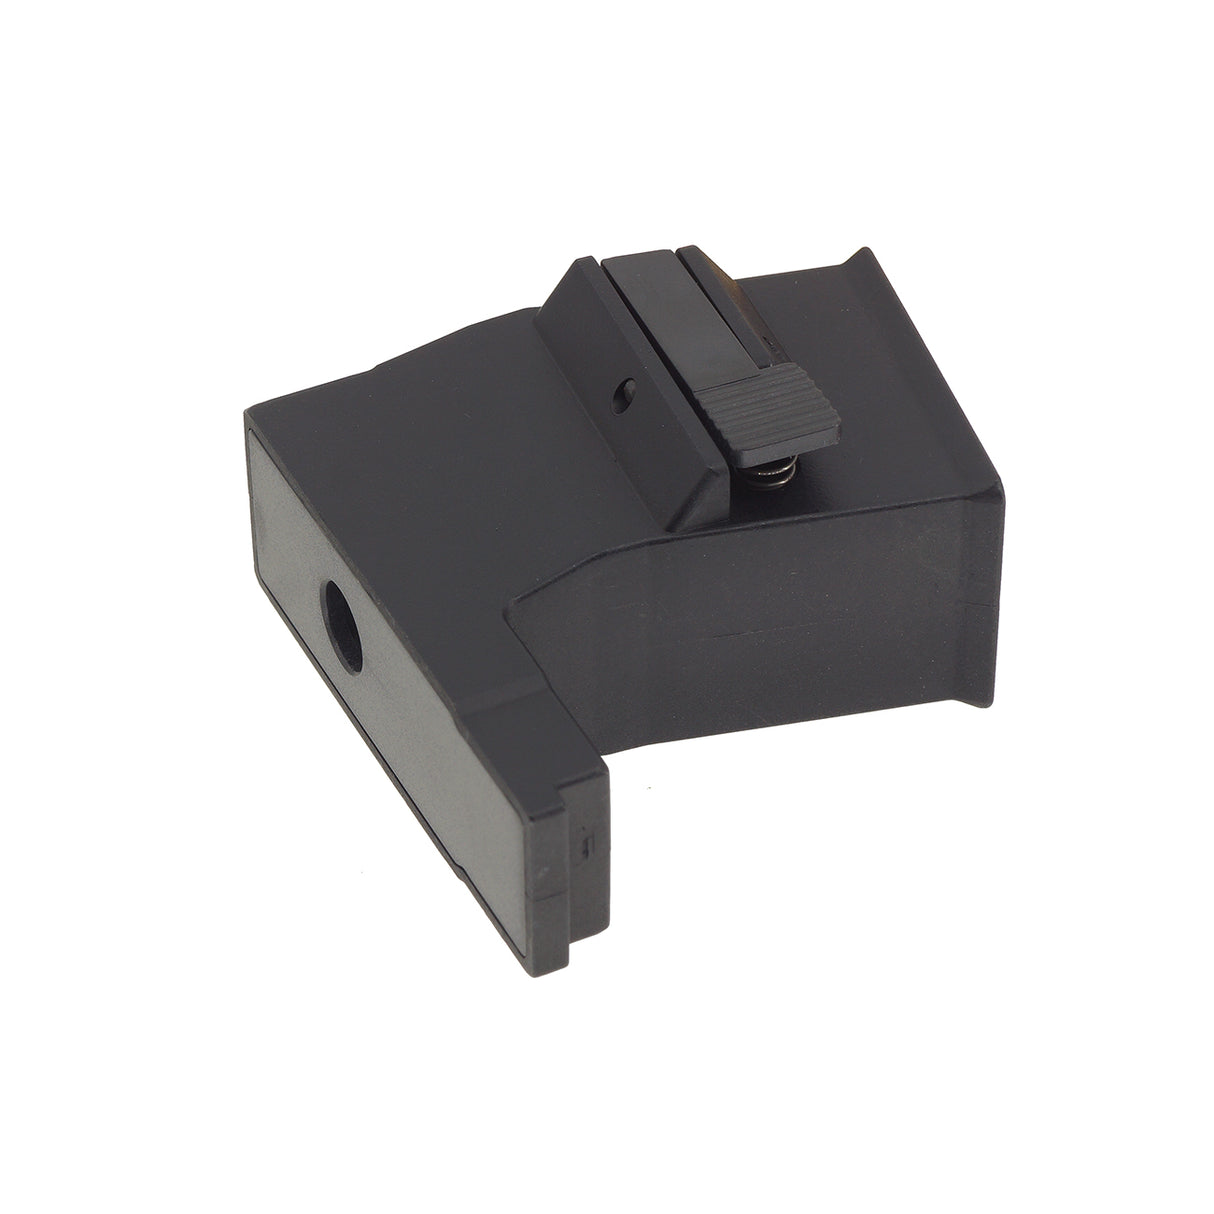 Double Bell AK to 9mm Magazine Adapter ( DB-K60 )